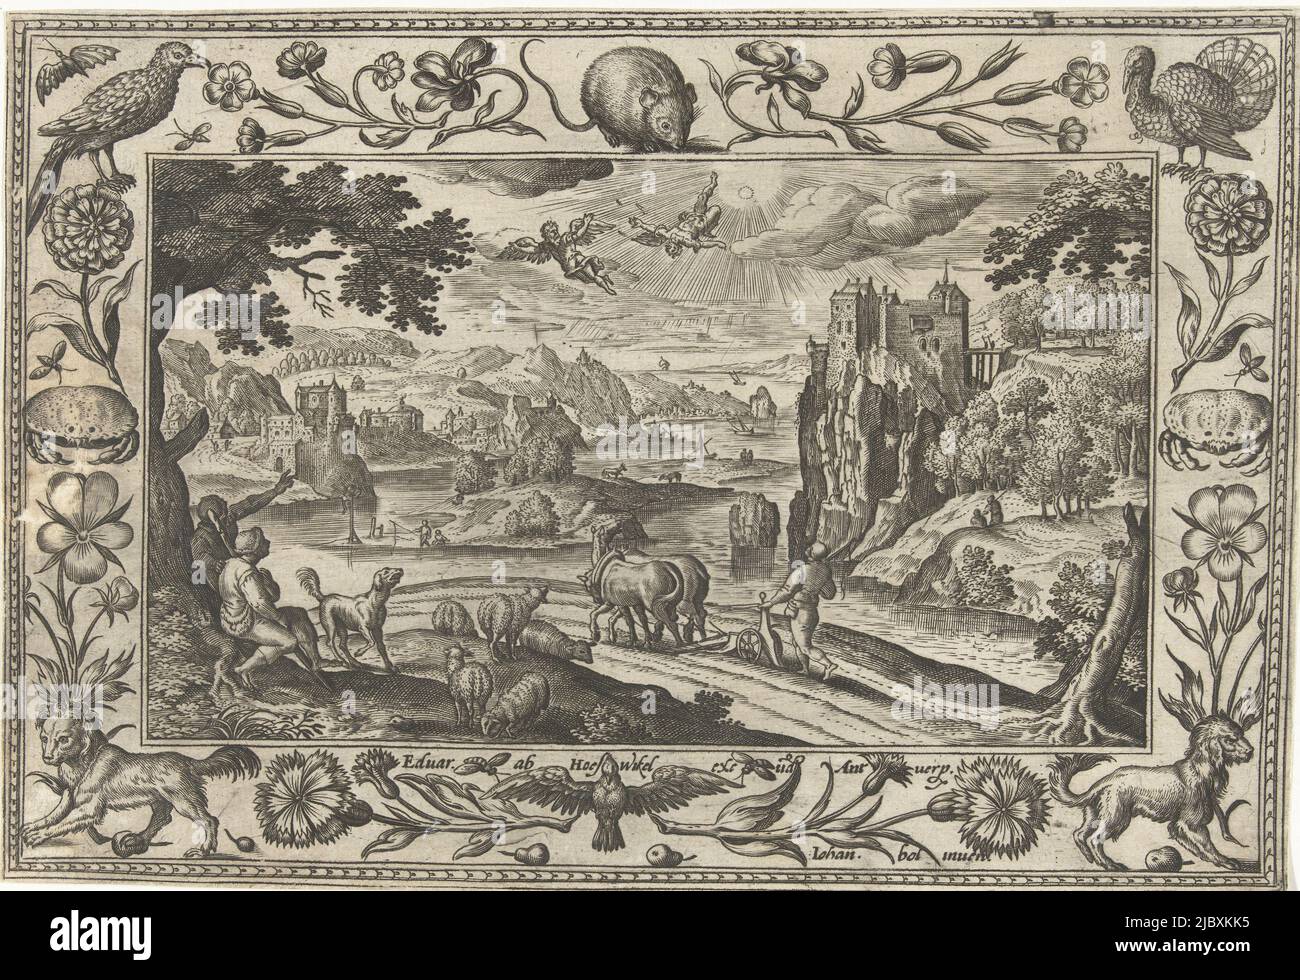 Landscape with field. In the sky Daedalus and Icarus. Icarus is flying too high near the sun. The wax on his wings melts and he falls from the sky. In the foreground, a farmer looks up from plowing, while two shepherds look up at the sky and point. The print has an ornamental frame with flowers and animals. It is part of a twenty-four-volume series of landscapes with Biblical, mythological scenes and hunting scenes., Fall of Icarus Landscapes with Biblical, mythological scenes and hunting scenes (series title), print maker: Adriaen Collaert, (mentioned on object), Hans Bol, (mentioned on Stock Photo